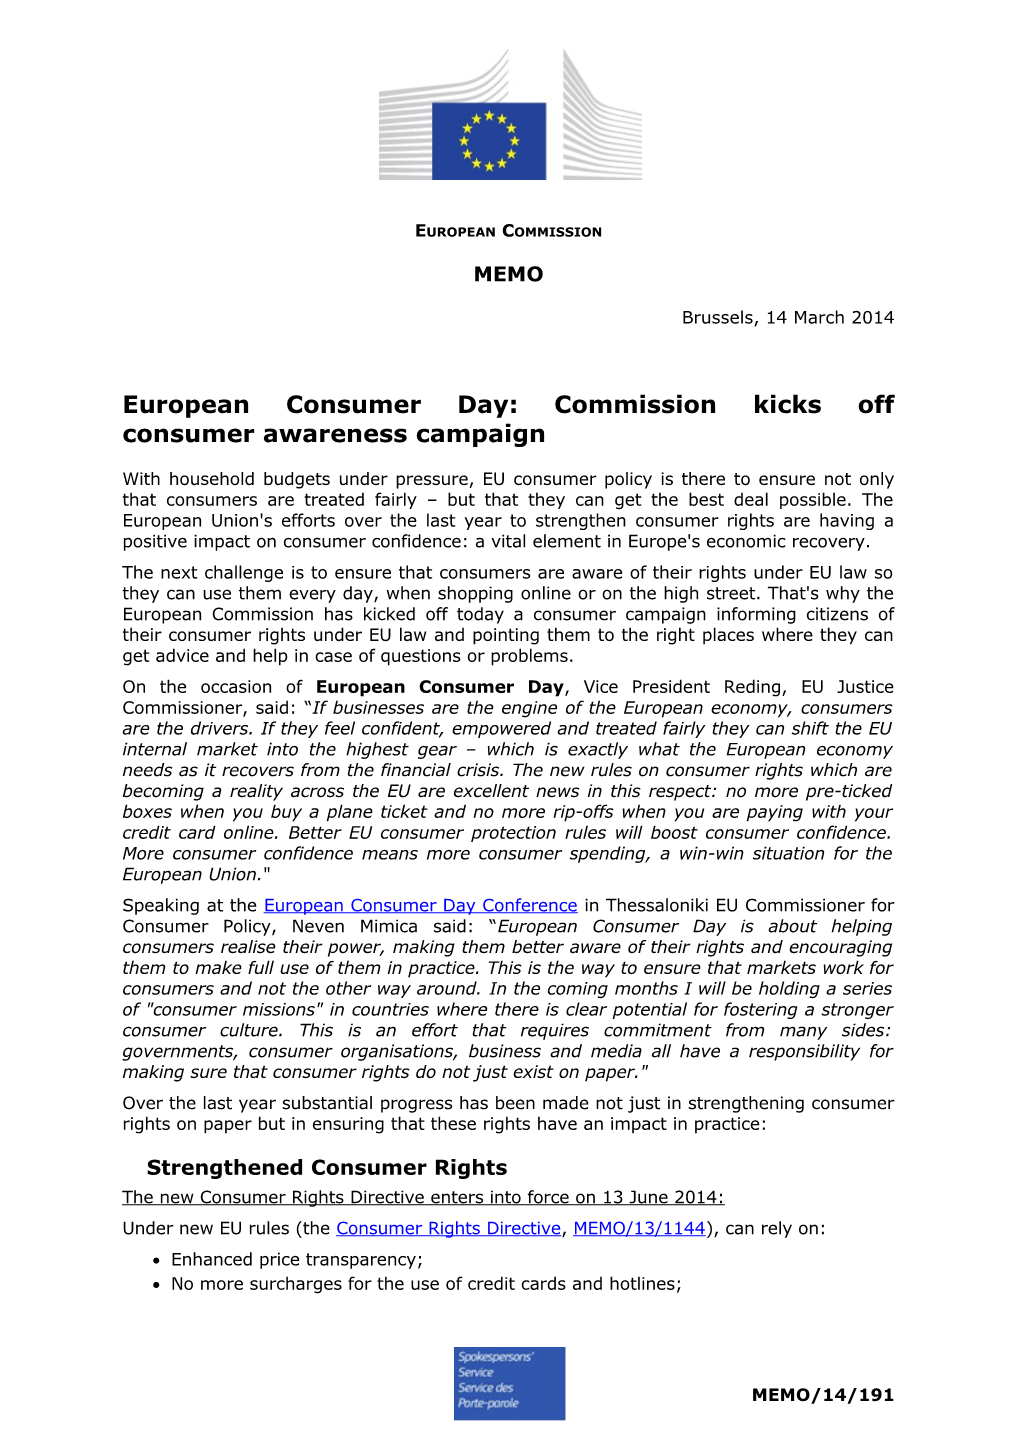 European Consumer Day: Commission Kicks Off Consumer Awareness Campaign